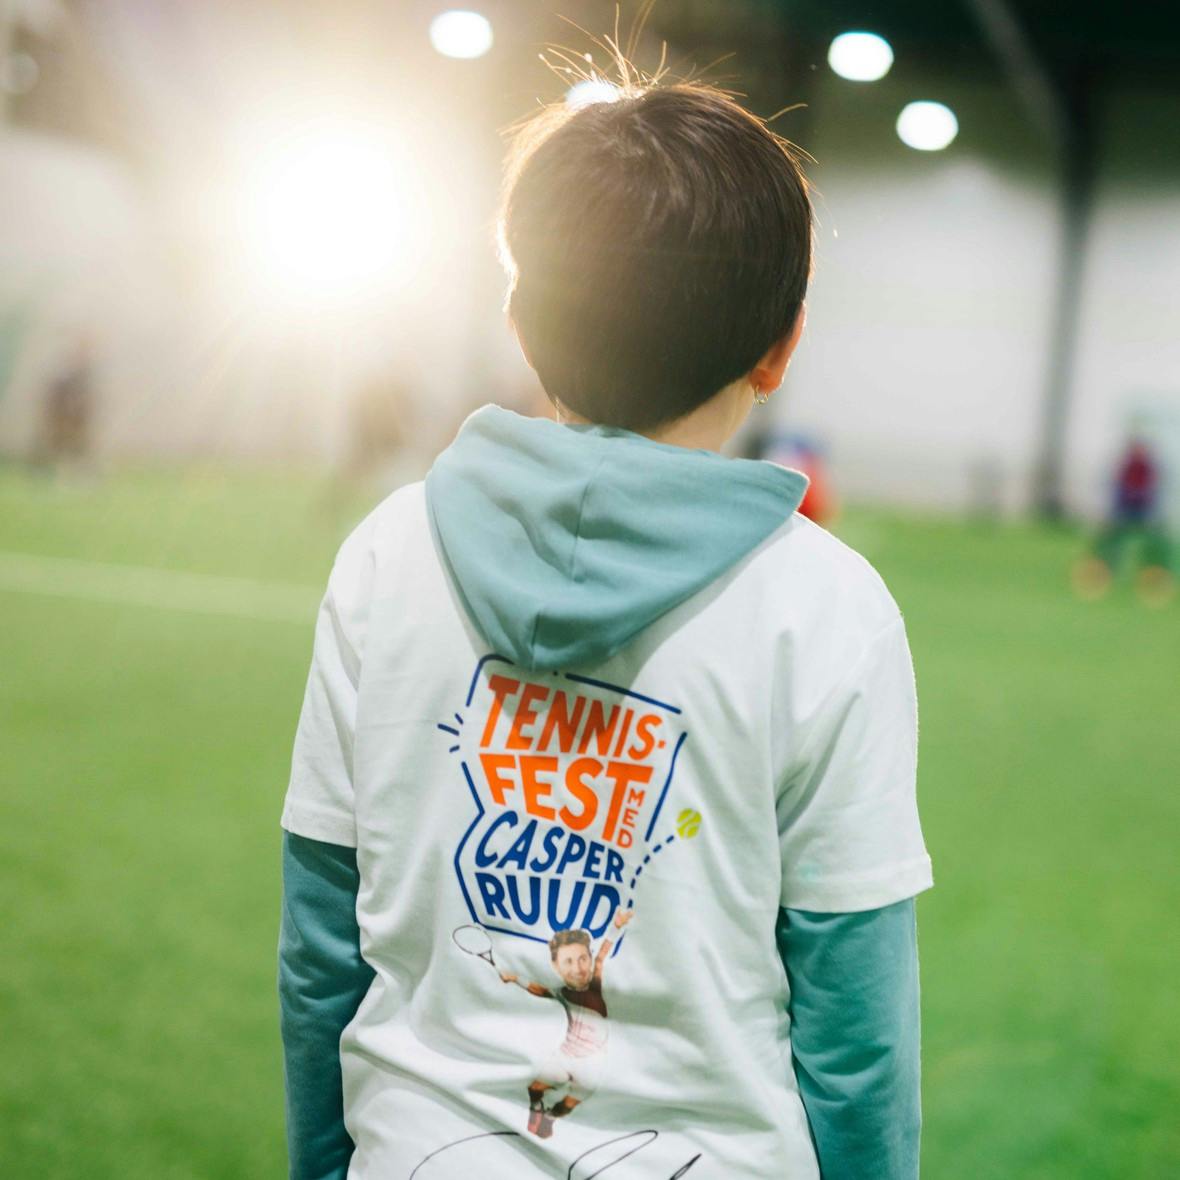 Child with short dark hair is standing with their back to the camera on an indoor fotball field. He is wearing a signed t-shirt by Casper Ruud 